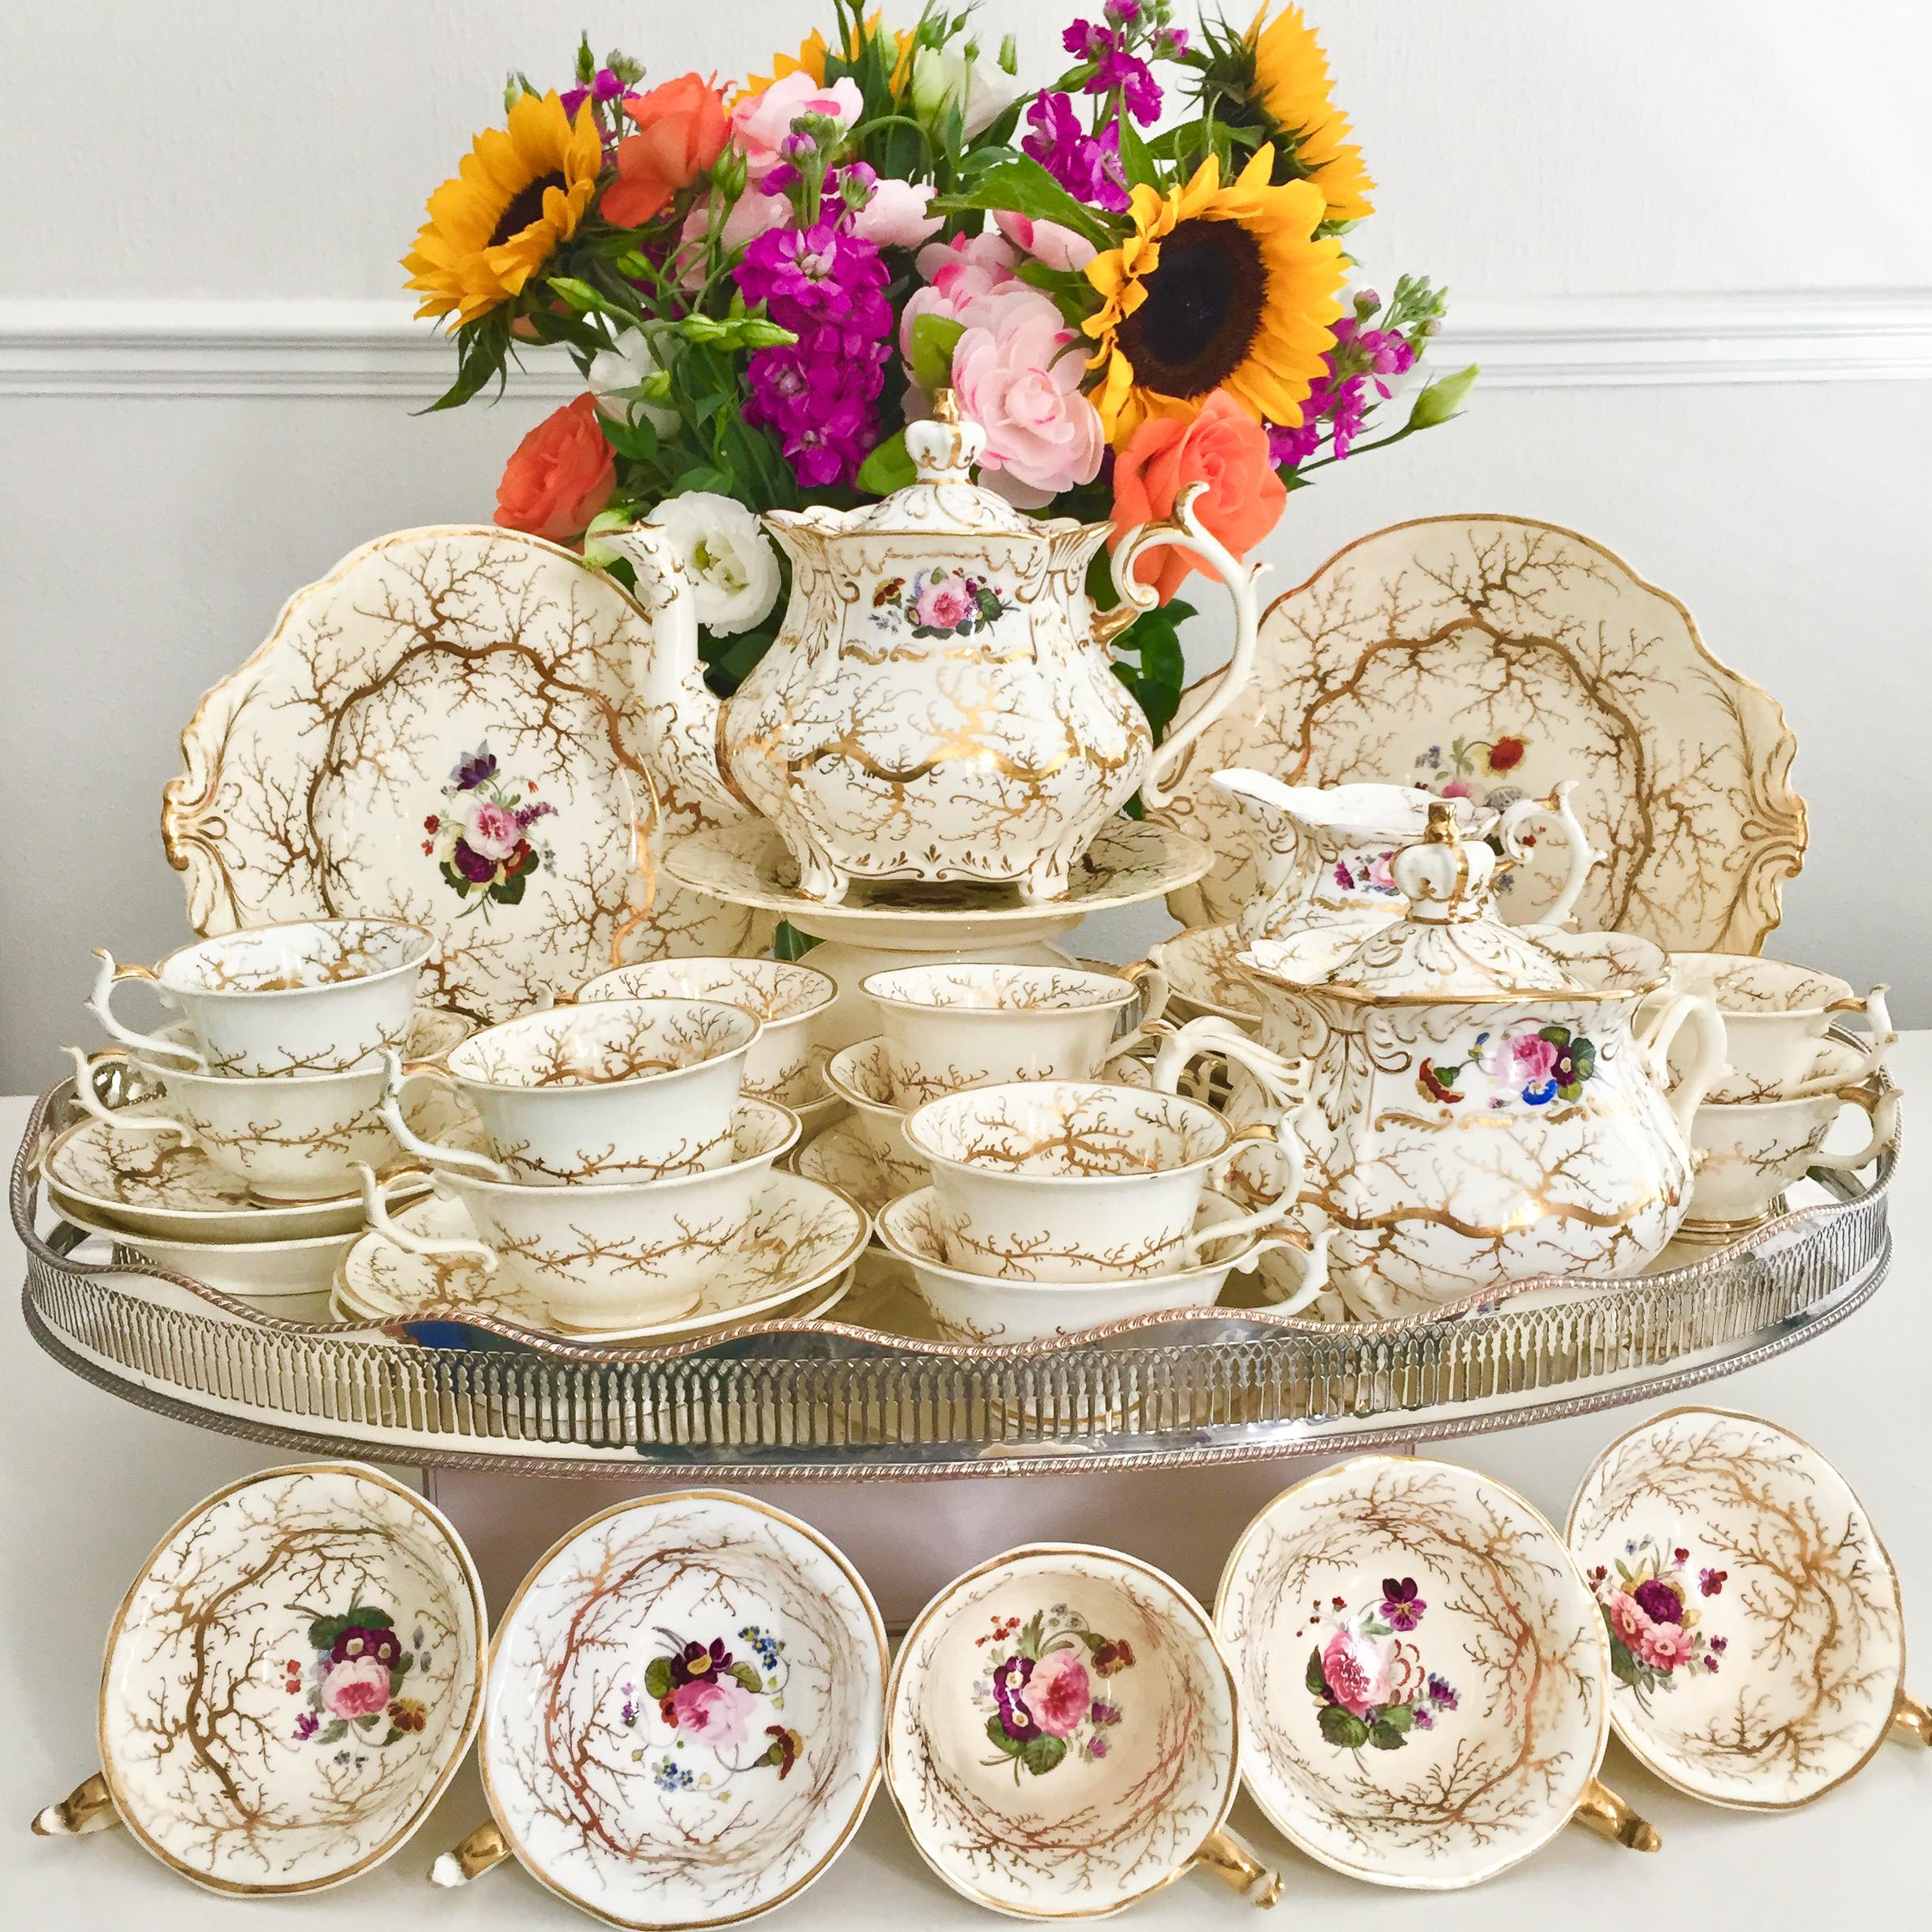 This is a stunning full tea service made by Rockingham in circa 1832, which was the Rococo Revival era. It is cream white with gilt and beautiful hand painted flowers. The service consists of a large teapot with stand, 10 teacups, 7 coffee cups, 12